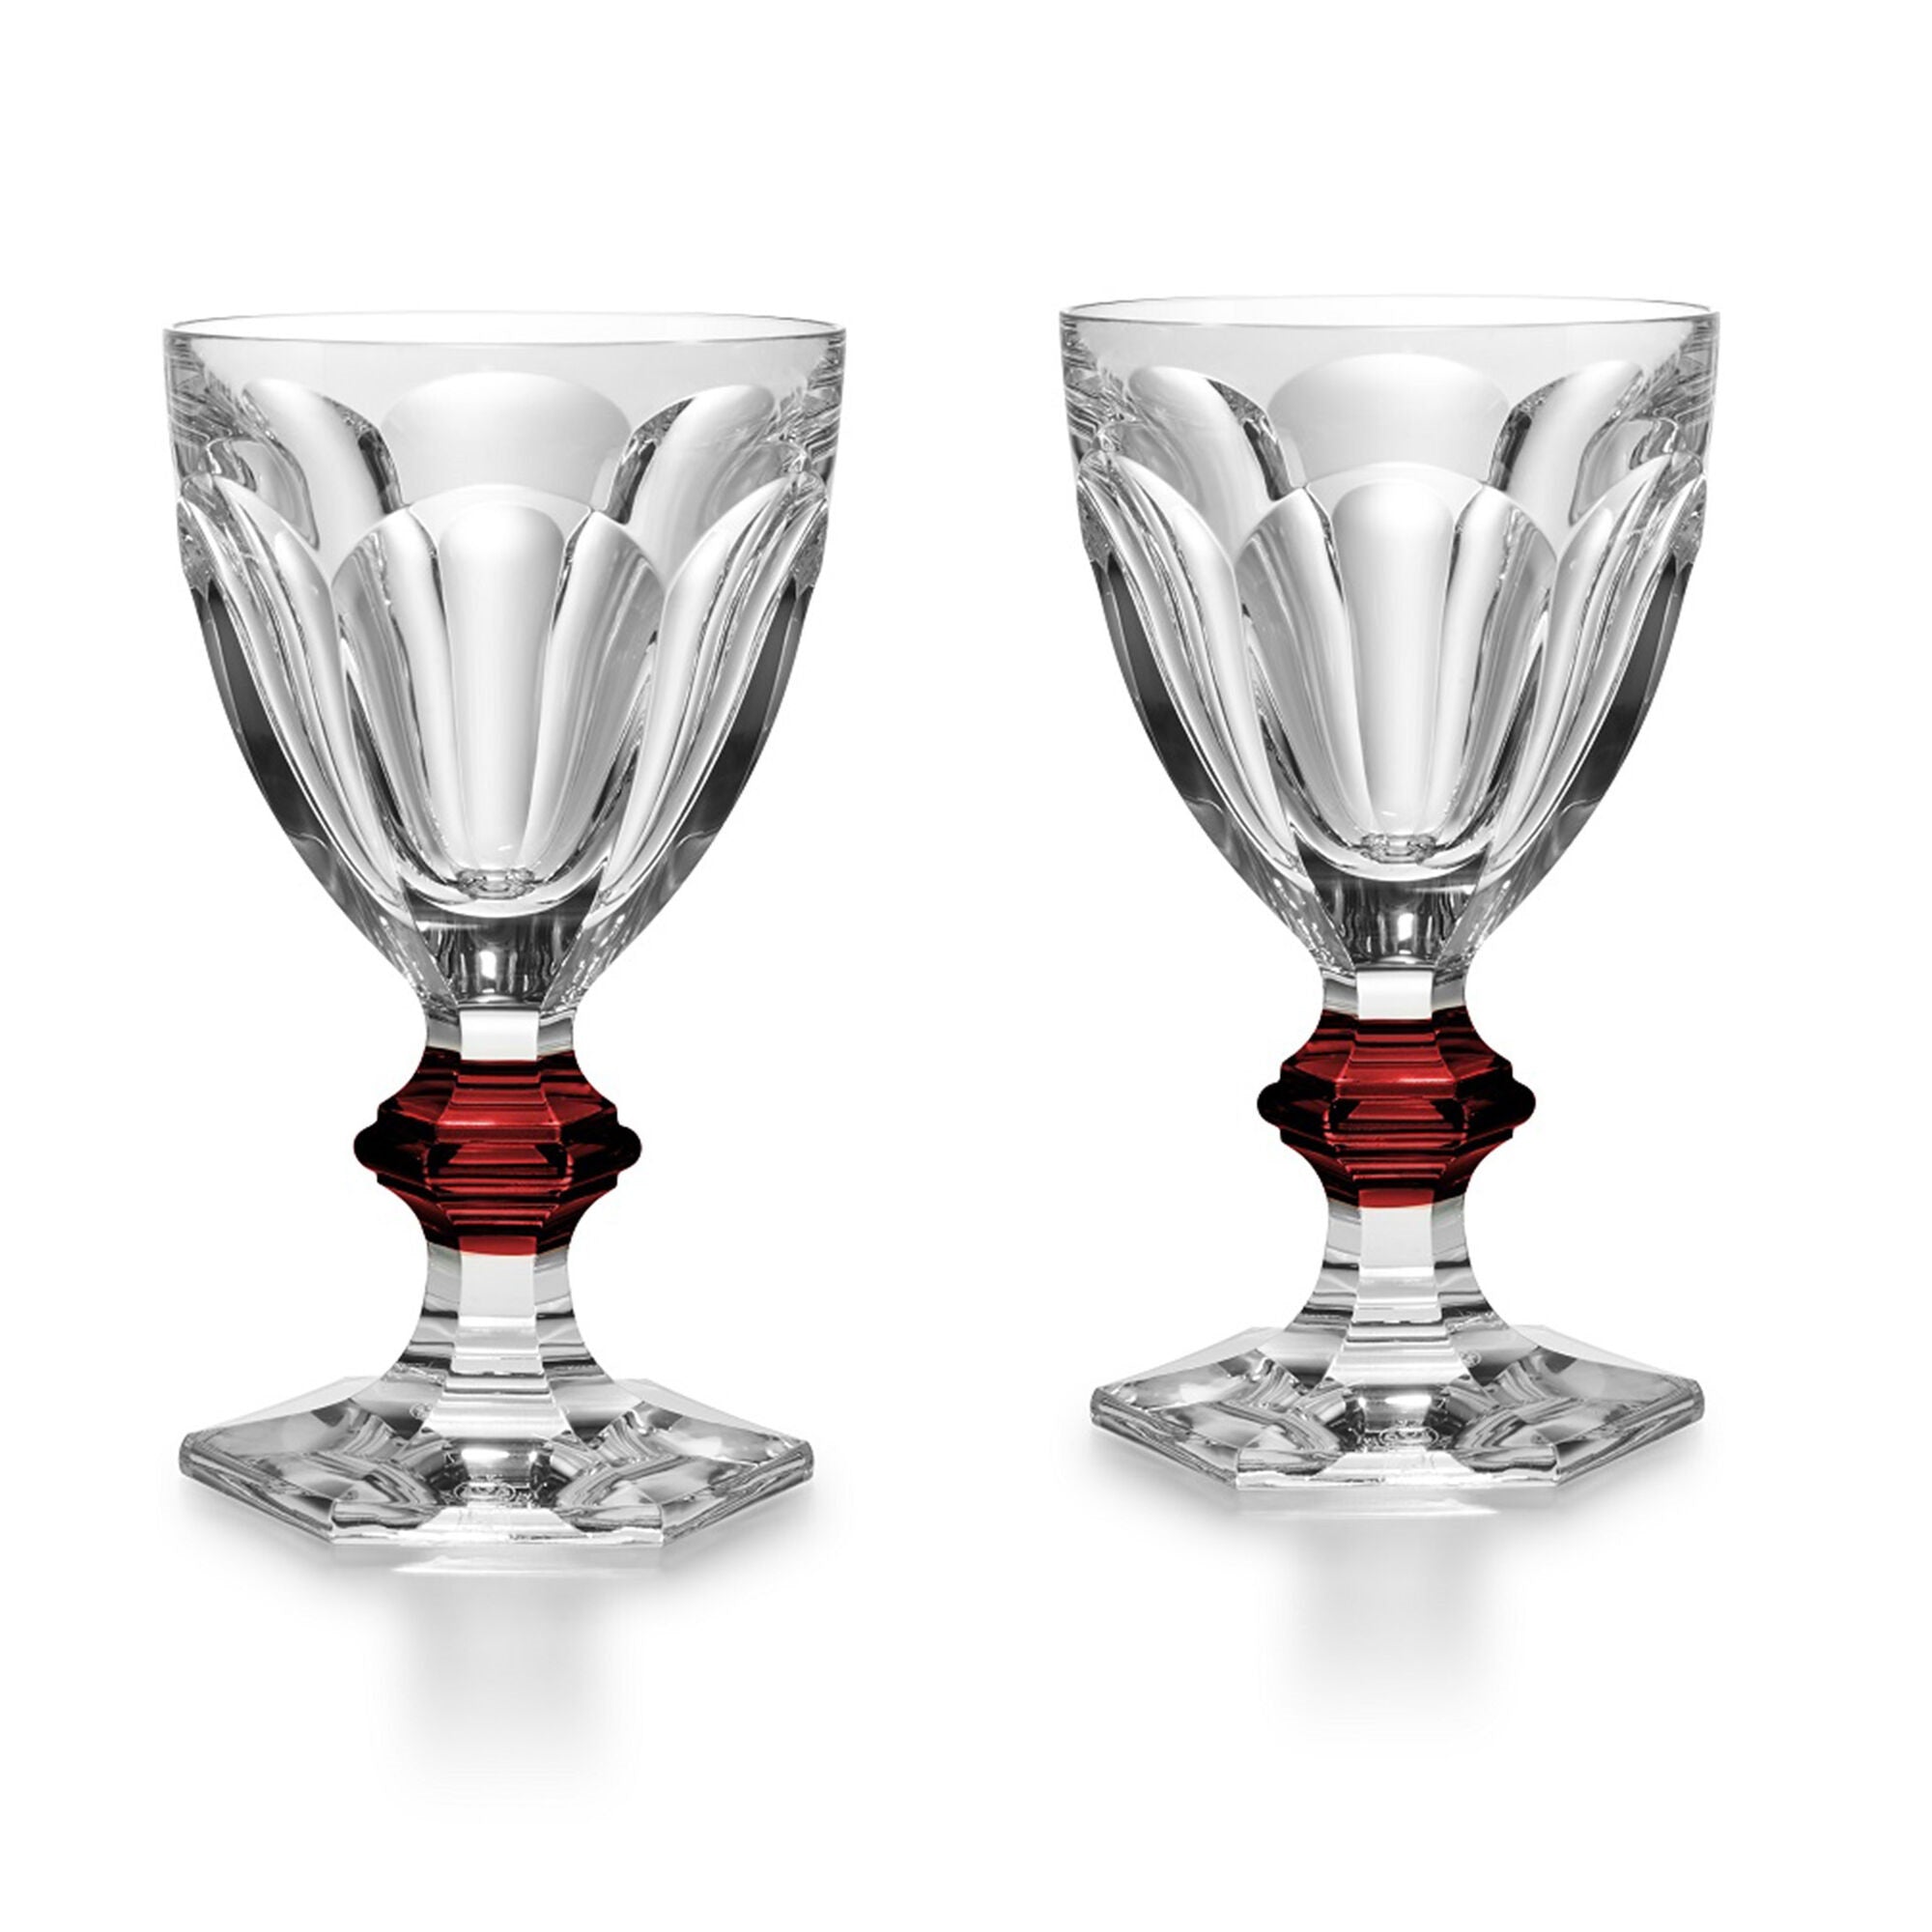 Baccarat Harcourt 1841 Set of 2 Water Glasses, Ruby